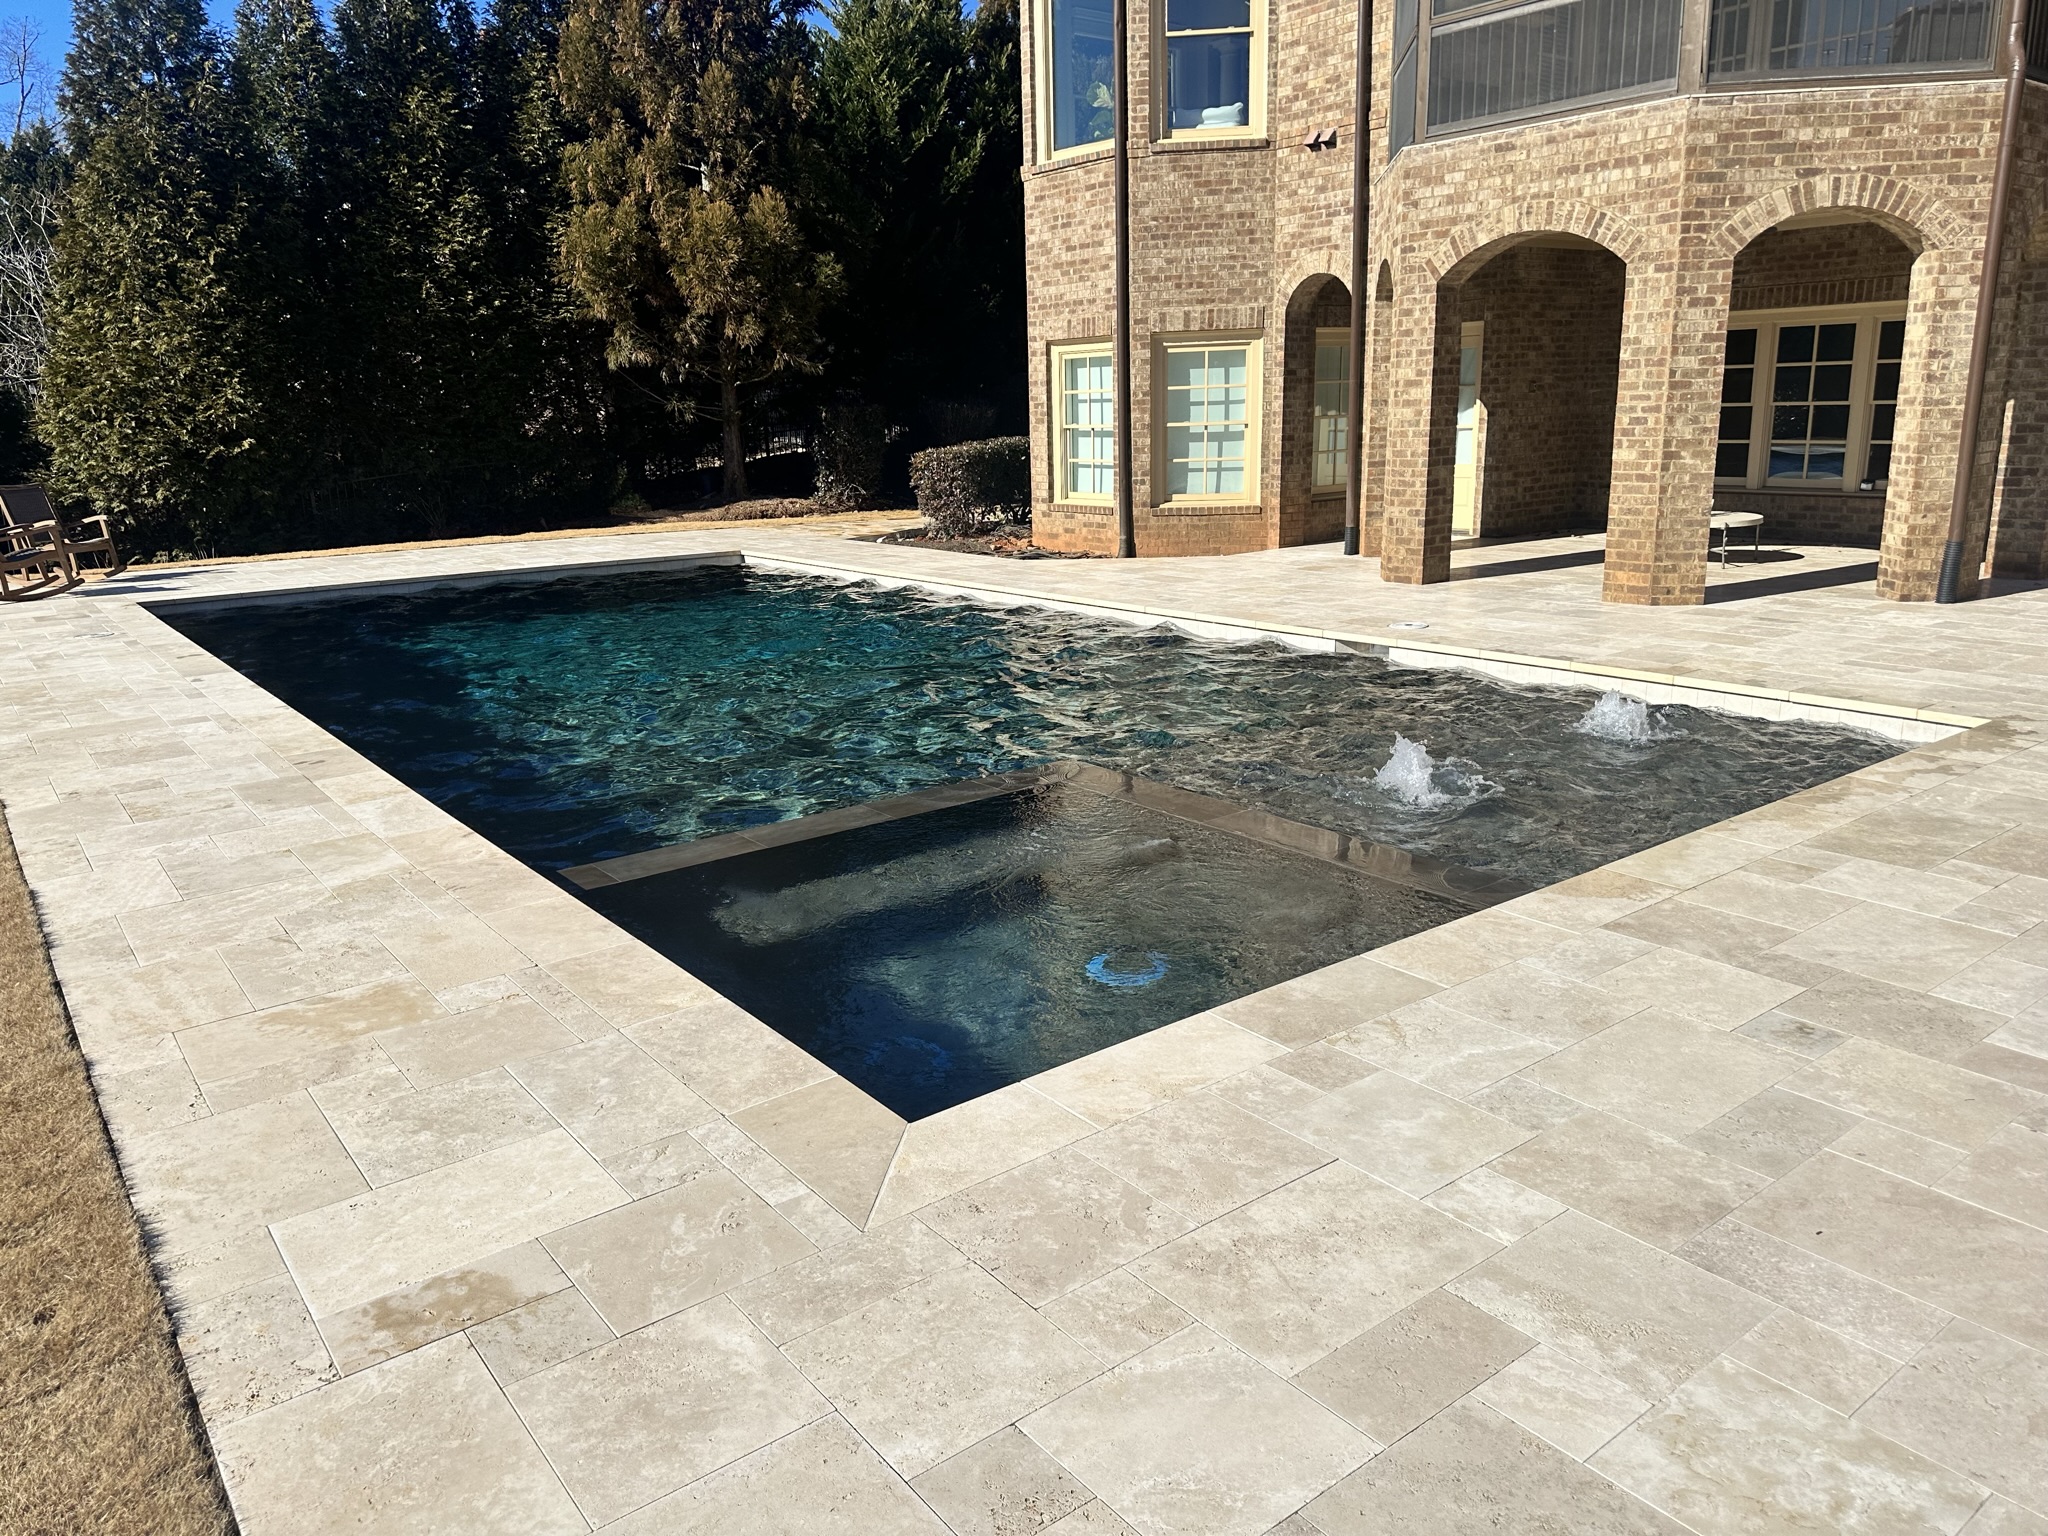 A modern straight-line pool with an adjacent spa, located at The Manor golf course.